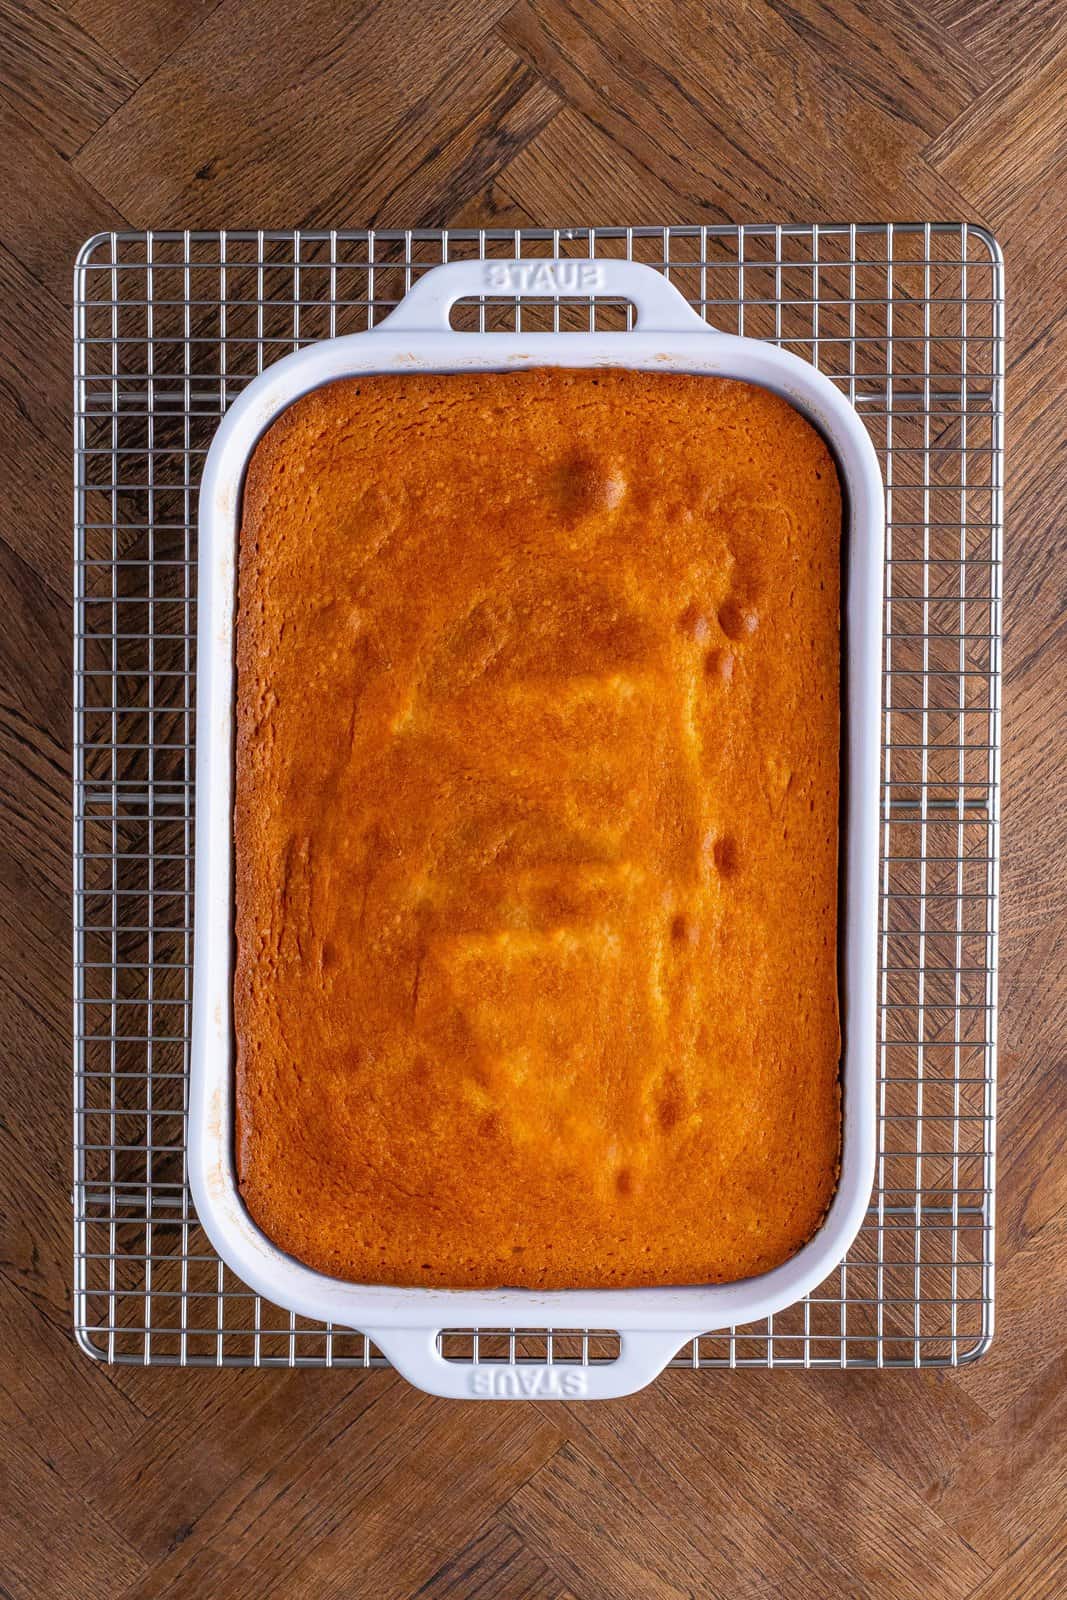 A fresh baked from scratch yellow cake.